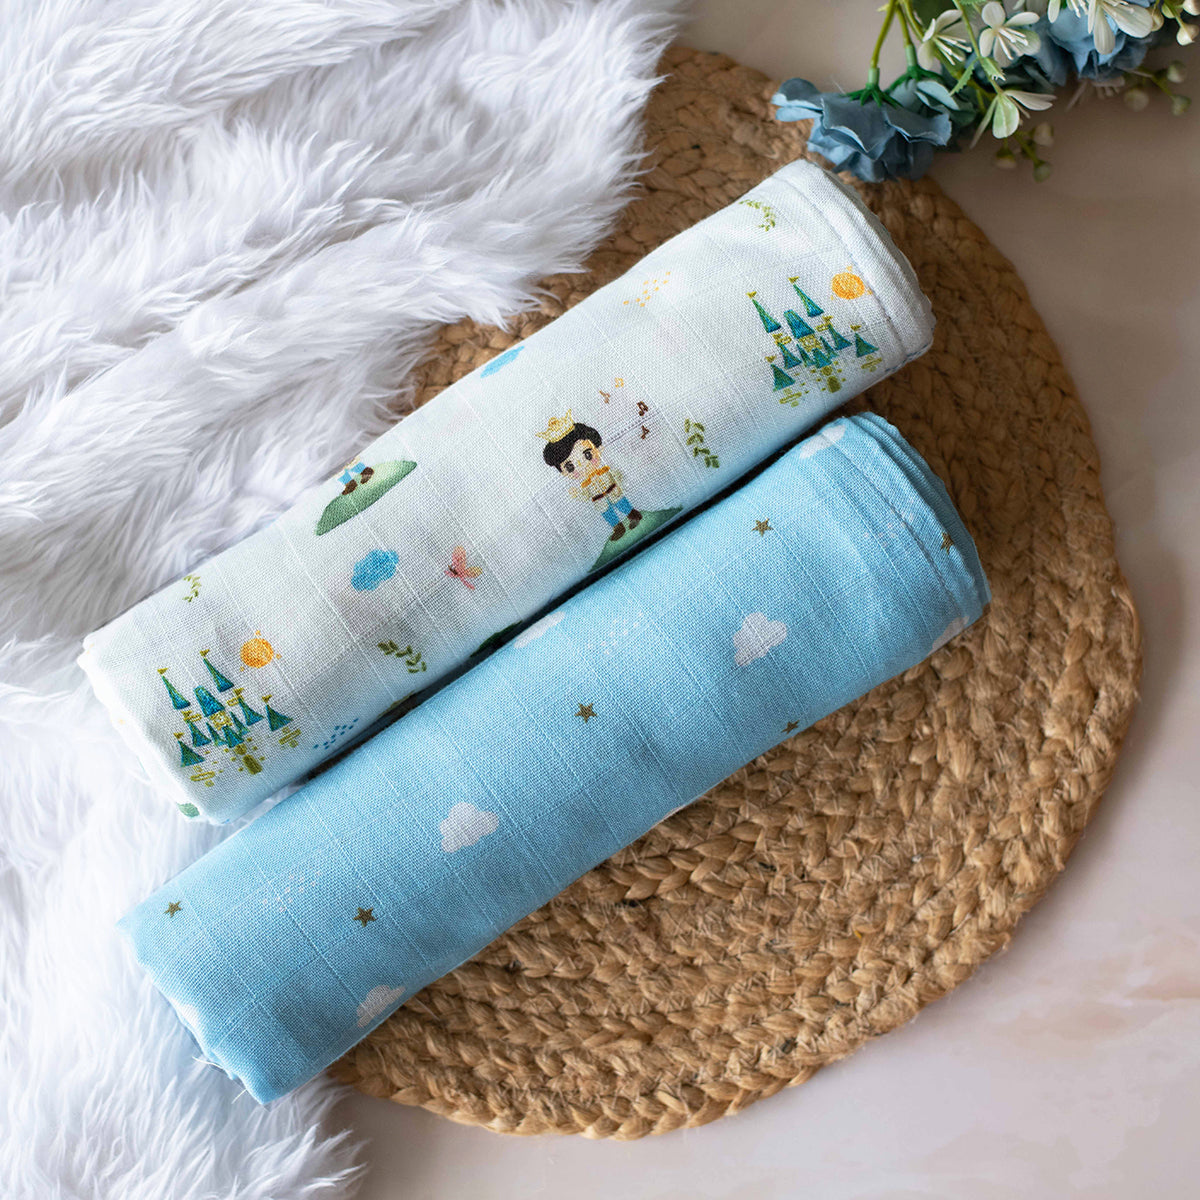 Tiny Snooze Organic Muslin Swaddles (Set of 2)- The Little Prince